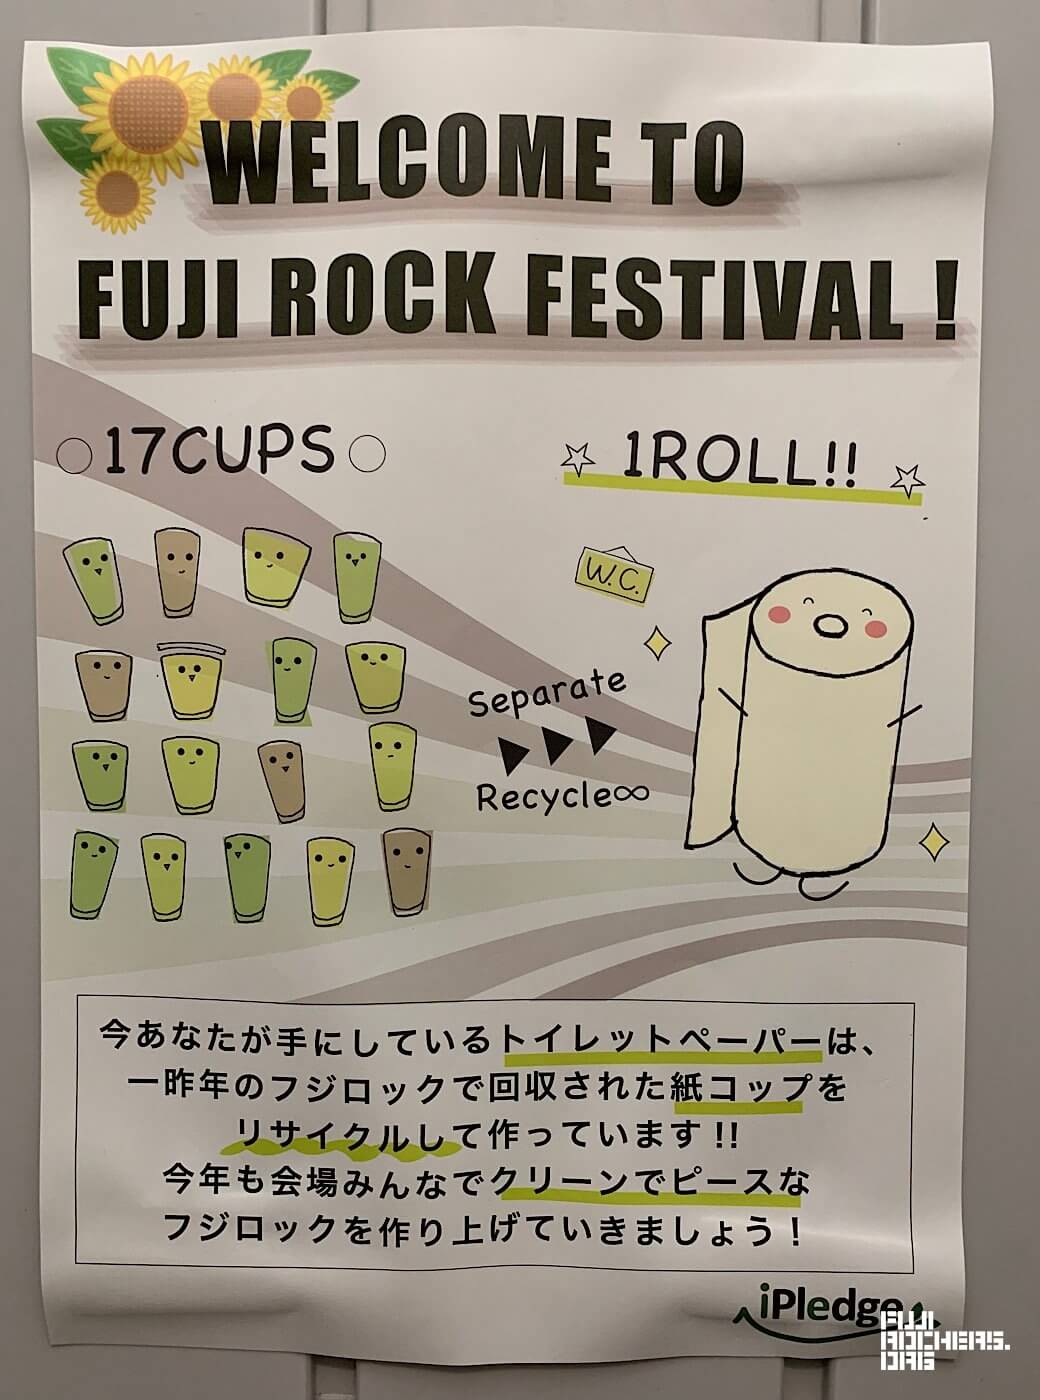 Fuji Rock – Set in Nature – is Helping You Conserve it!